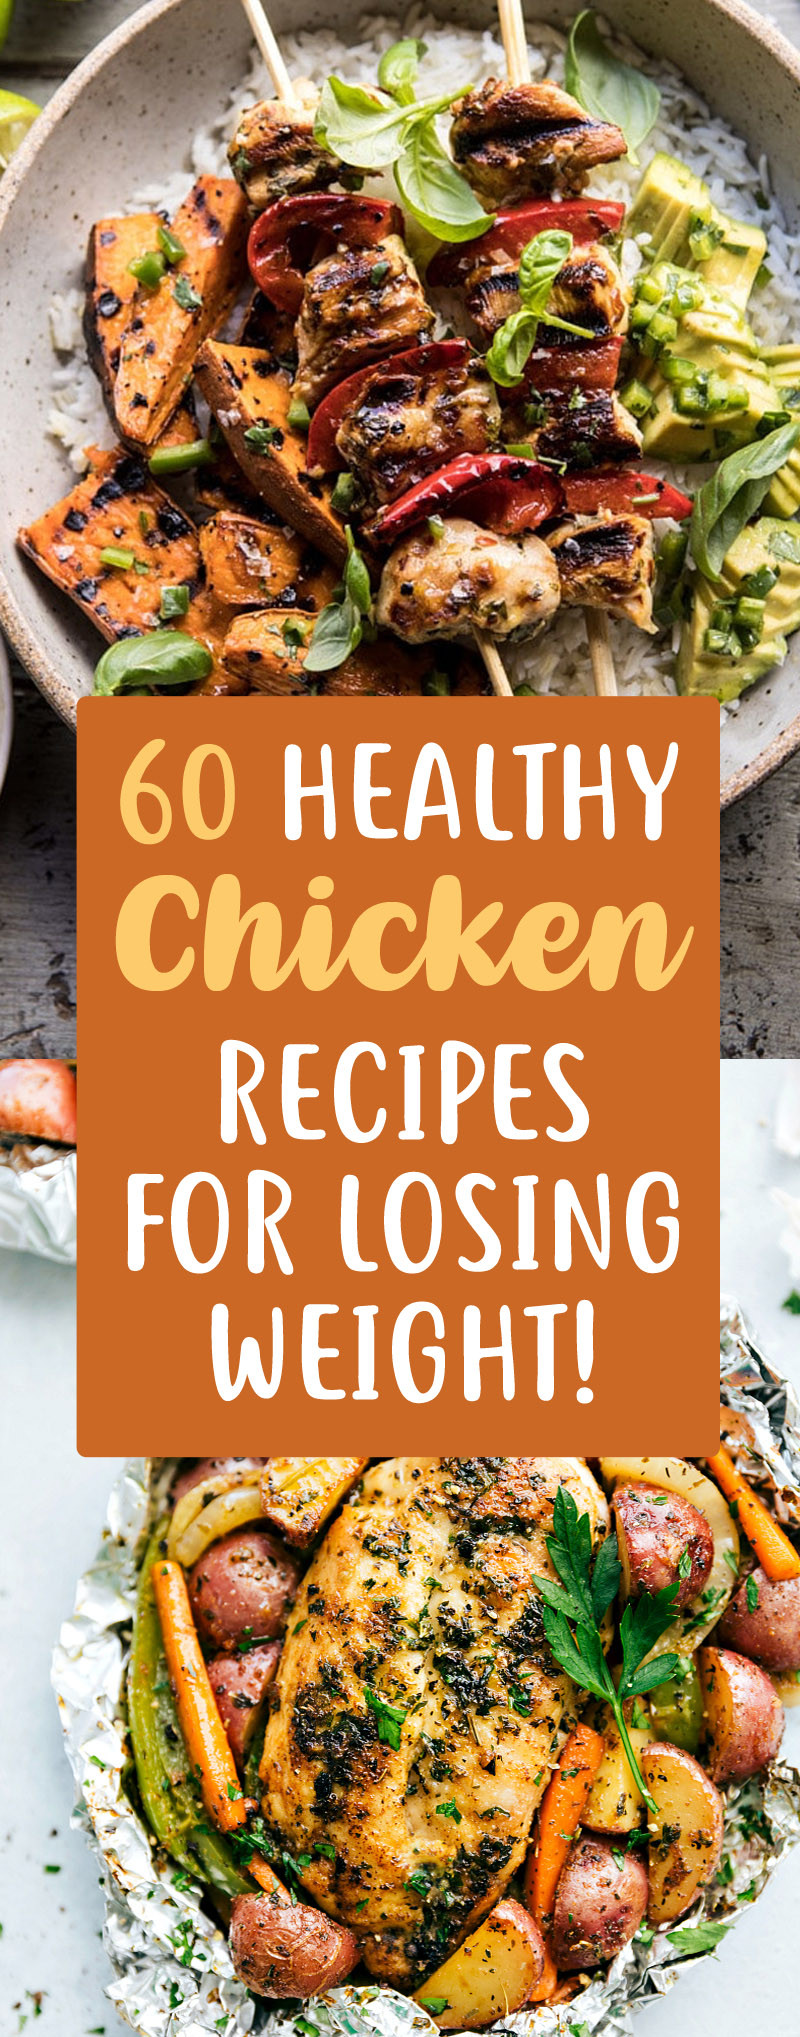 Healthy Chicken Recipes For Weight Loss
 60 Insanely Delicious Chicken Recipes That Can Help You